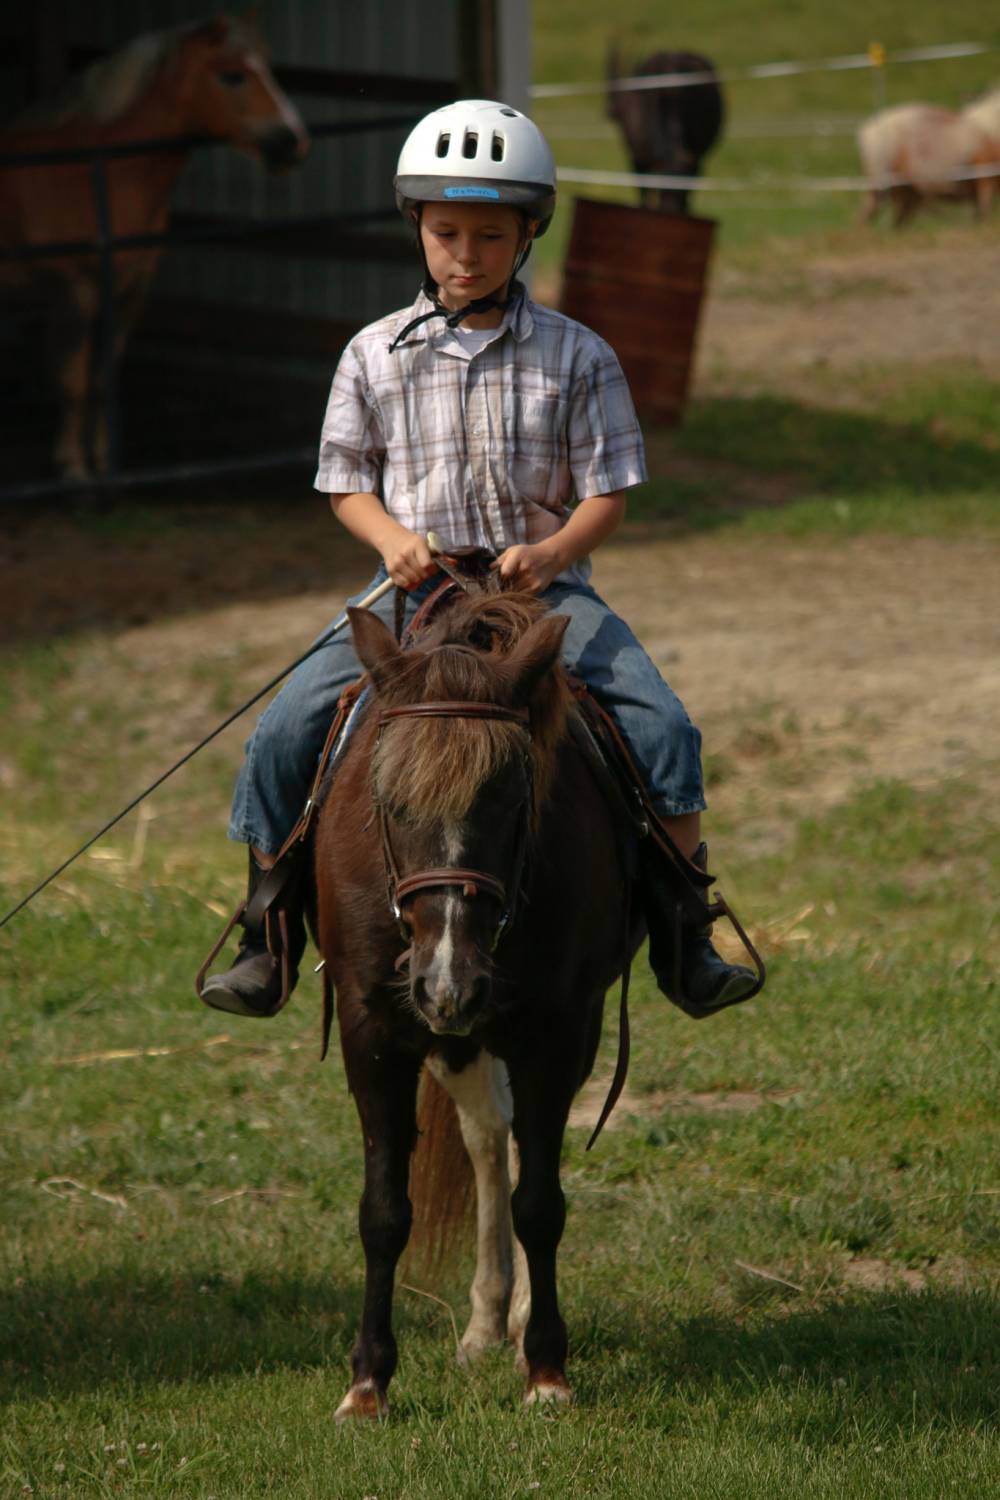 TOP PENNSYLVANIA ADVENTURE CAMP: Fairview Farm and Guest Ranch - Rough Riders Girl s Camp is a Top Adventure Summer Camp located in Granville Summit Pennsylvania offering many fun and enriching Adventure and other camp programs. 